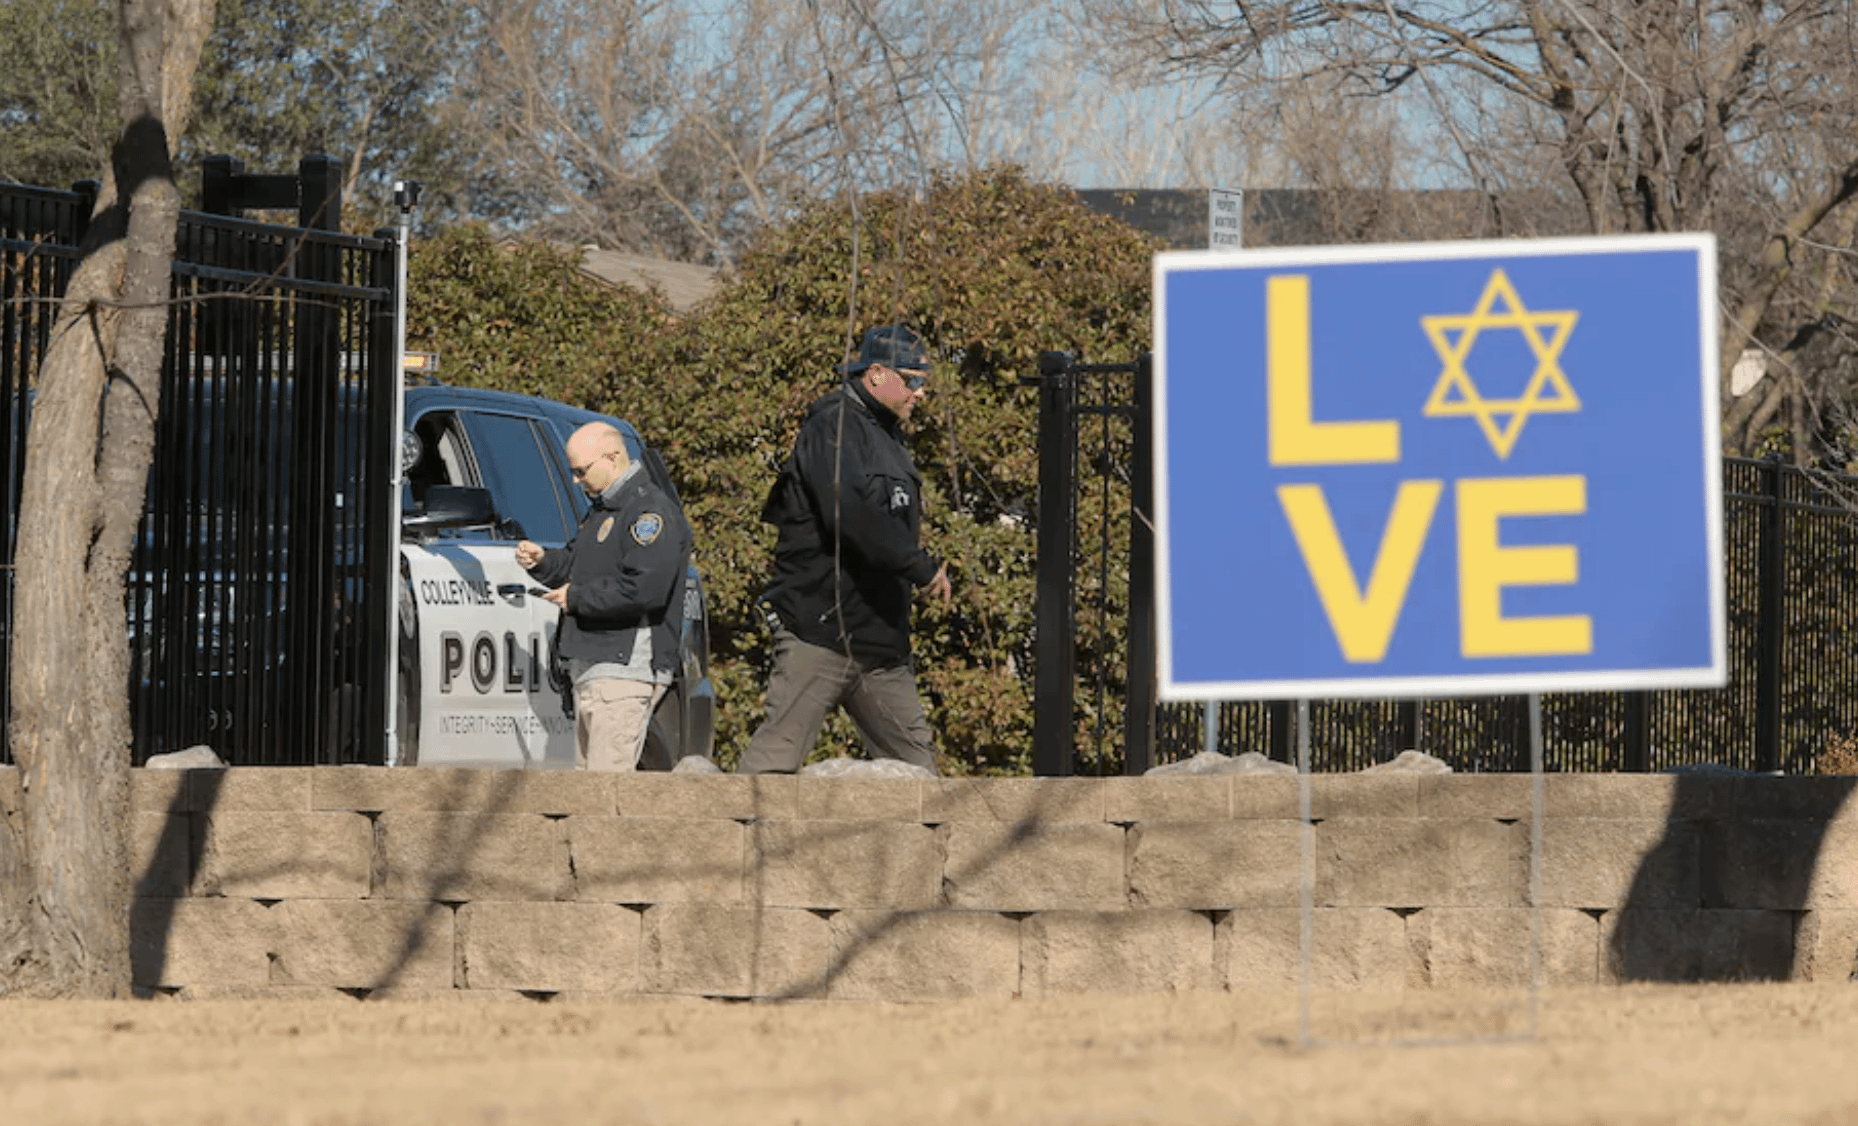 Washington Post: In a Texas synagogue, 11 hours of terror